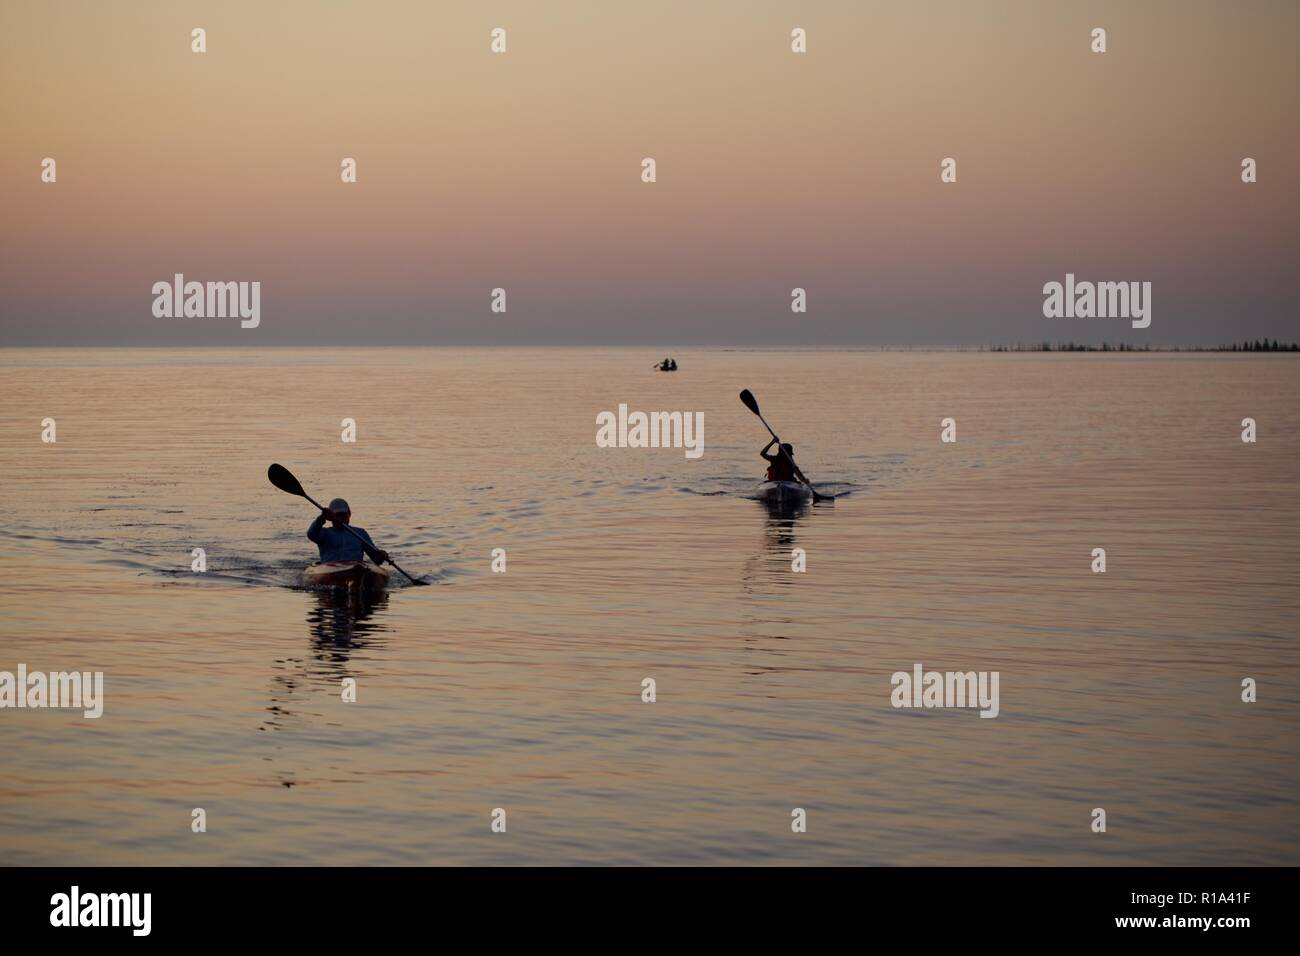 People on lake in canoe during a summer sunset, Ontario Canada Stock Photo